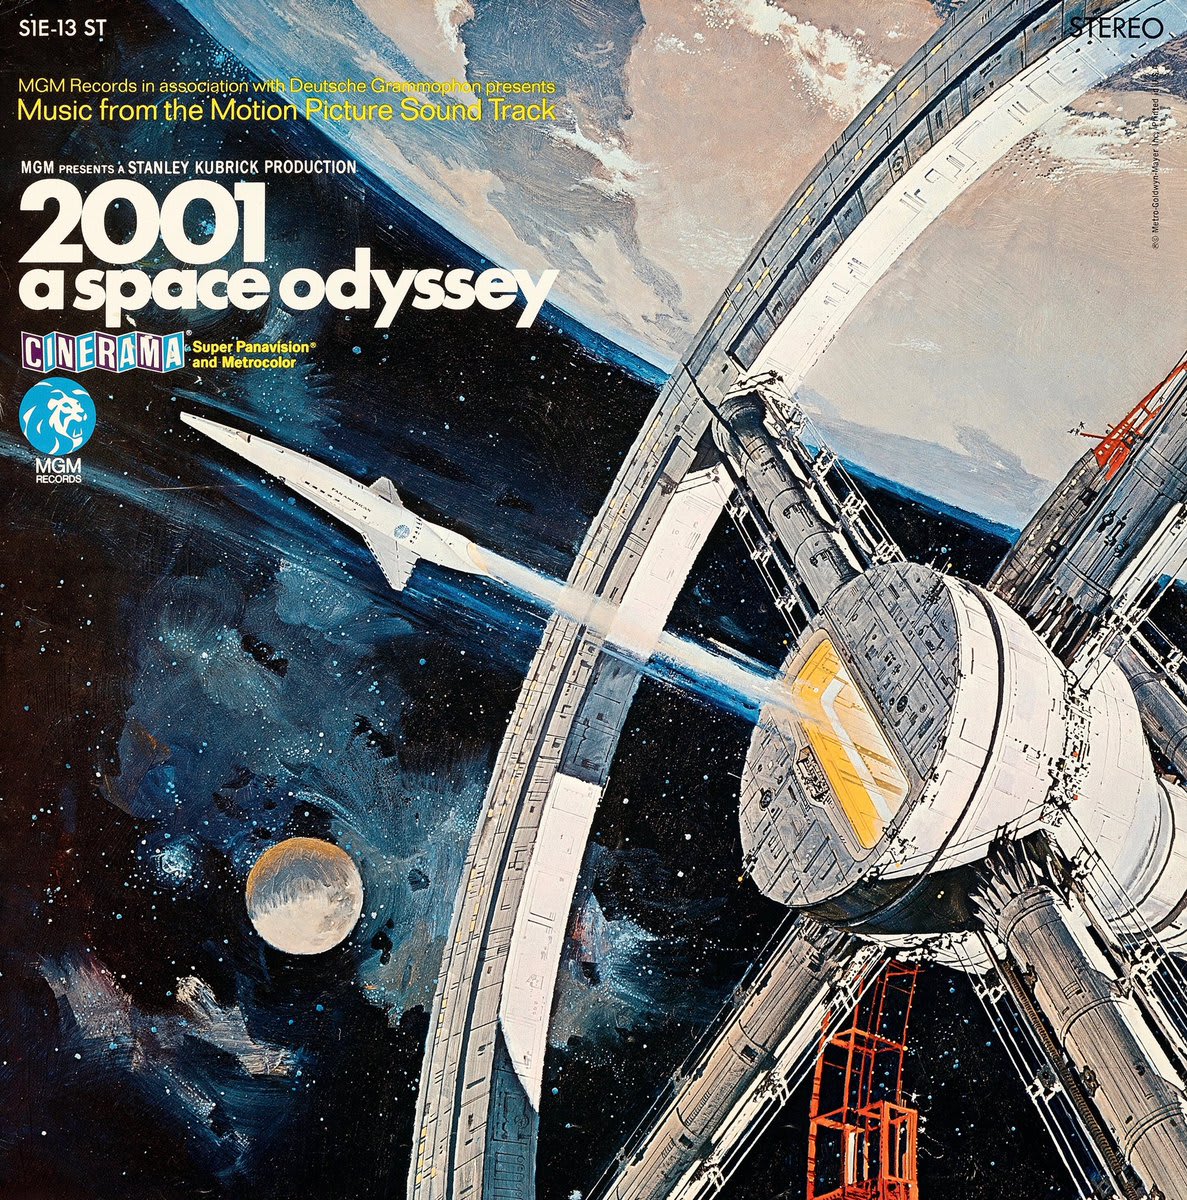 Record store poster for the “2001: A Space Odyssey” soundtrack, 1968. Art by Robert McCall.